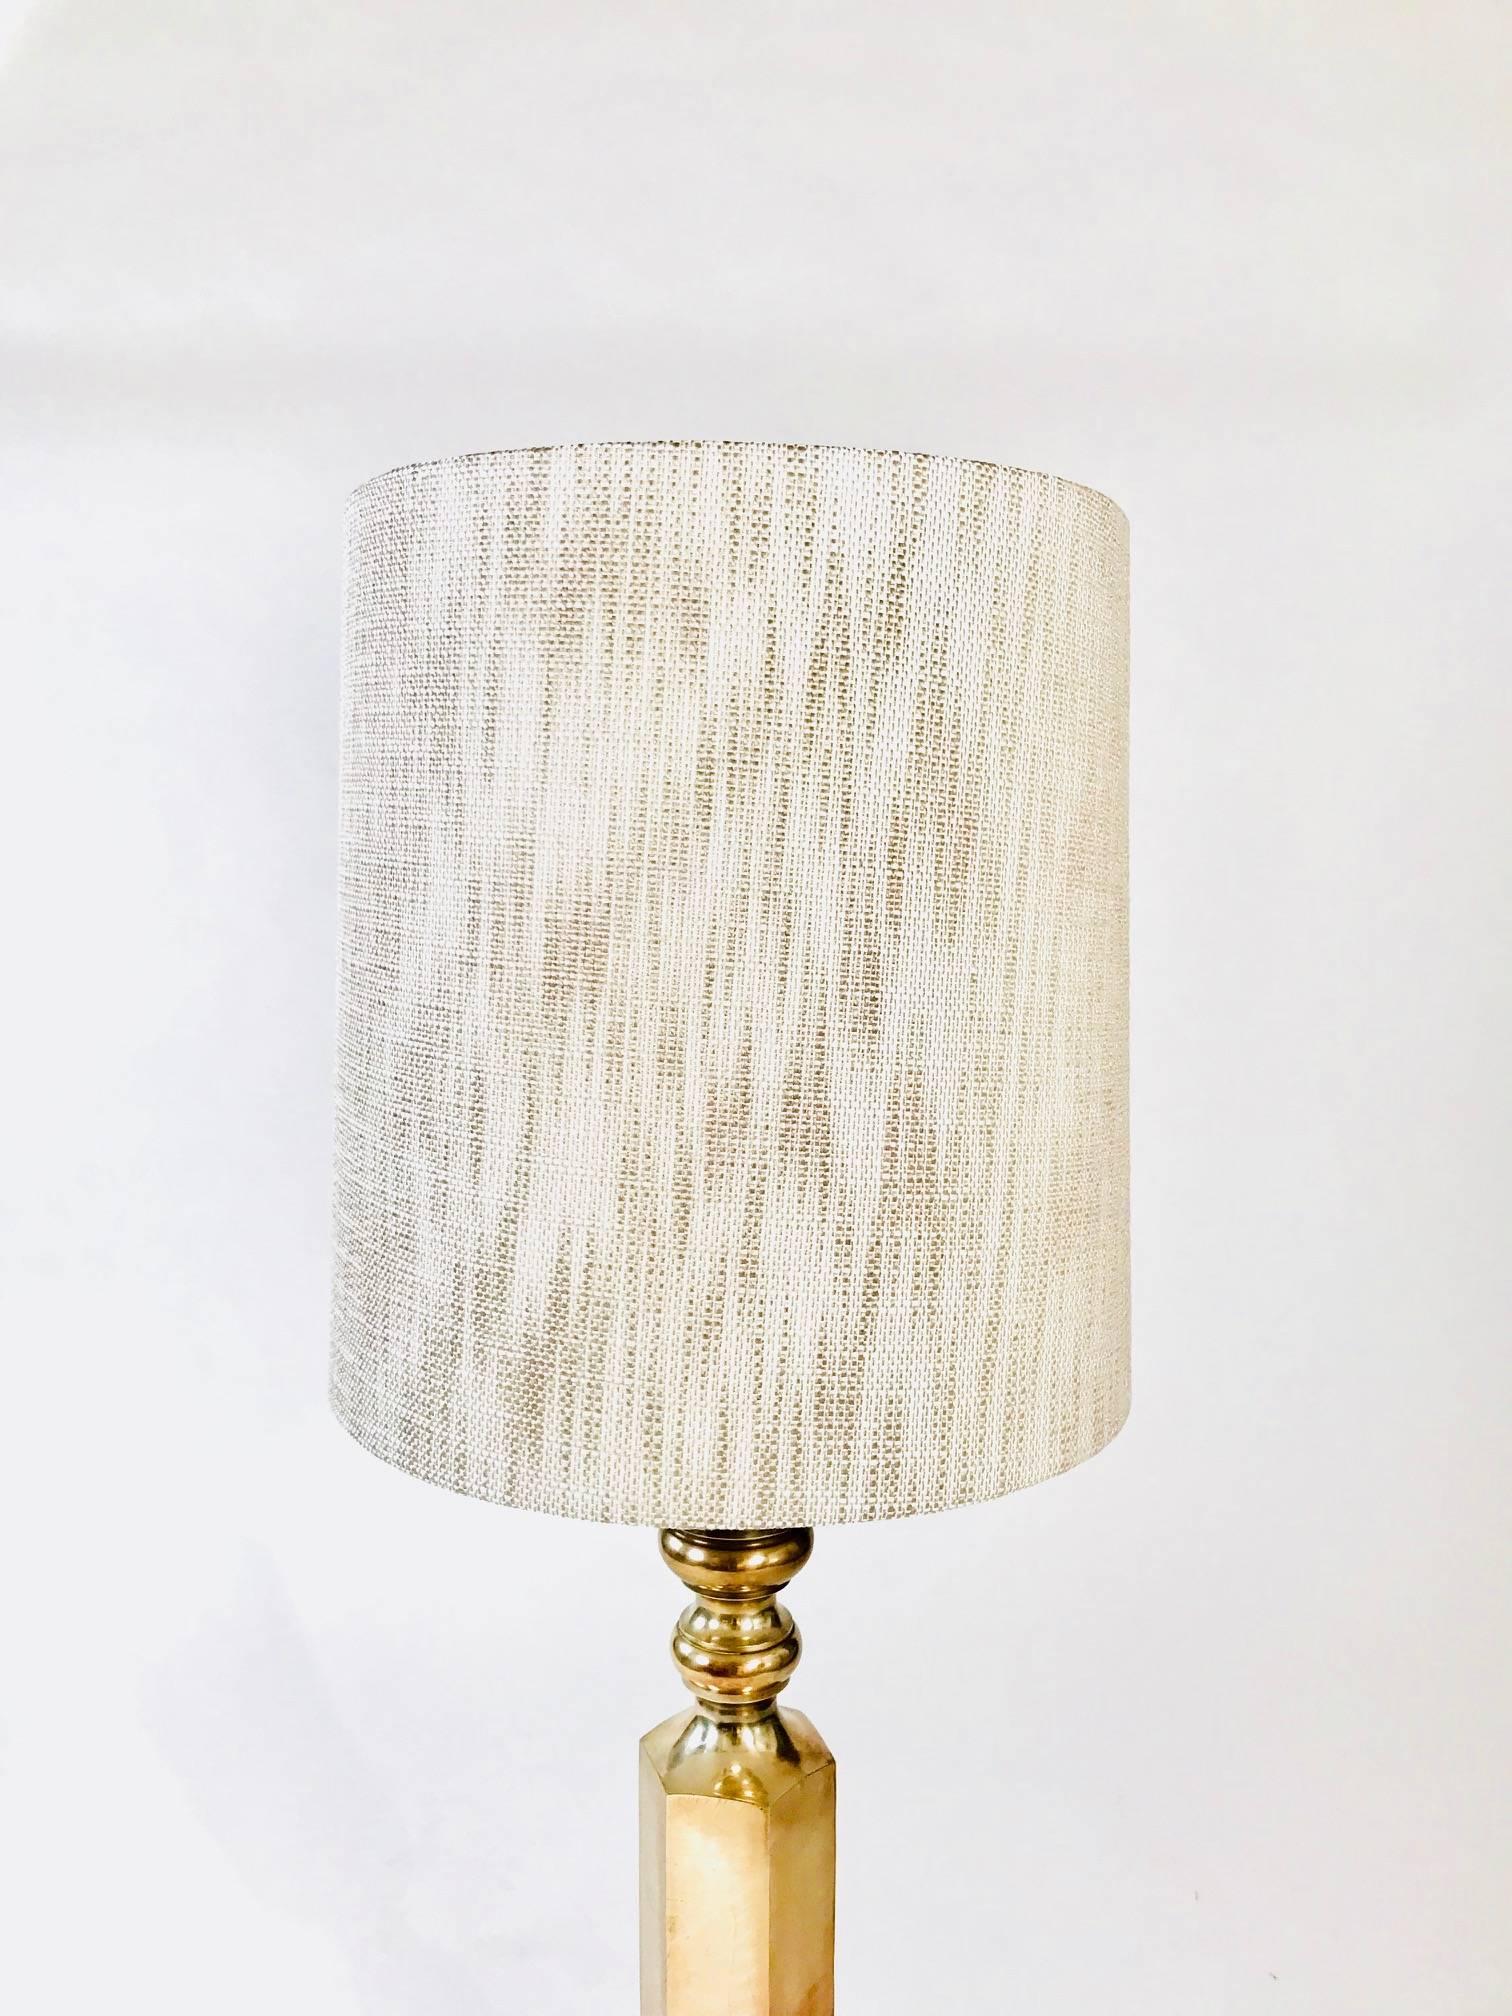 Beautiful nickel-plated table lamp featuring a thick shaped bass. The lamp has an absolutely beautifully patina. There are a couple of spots on the base that can easily be sanded off. We have not used any cleaner yet but could definitely be